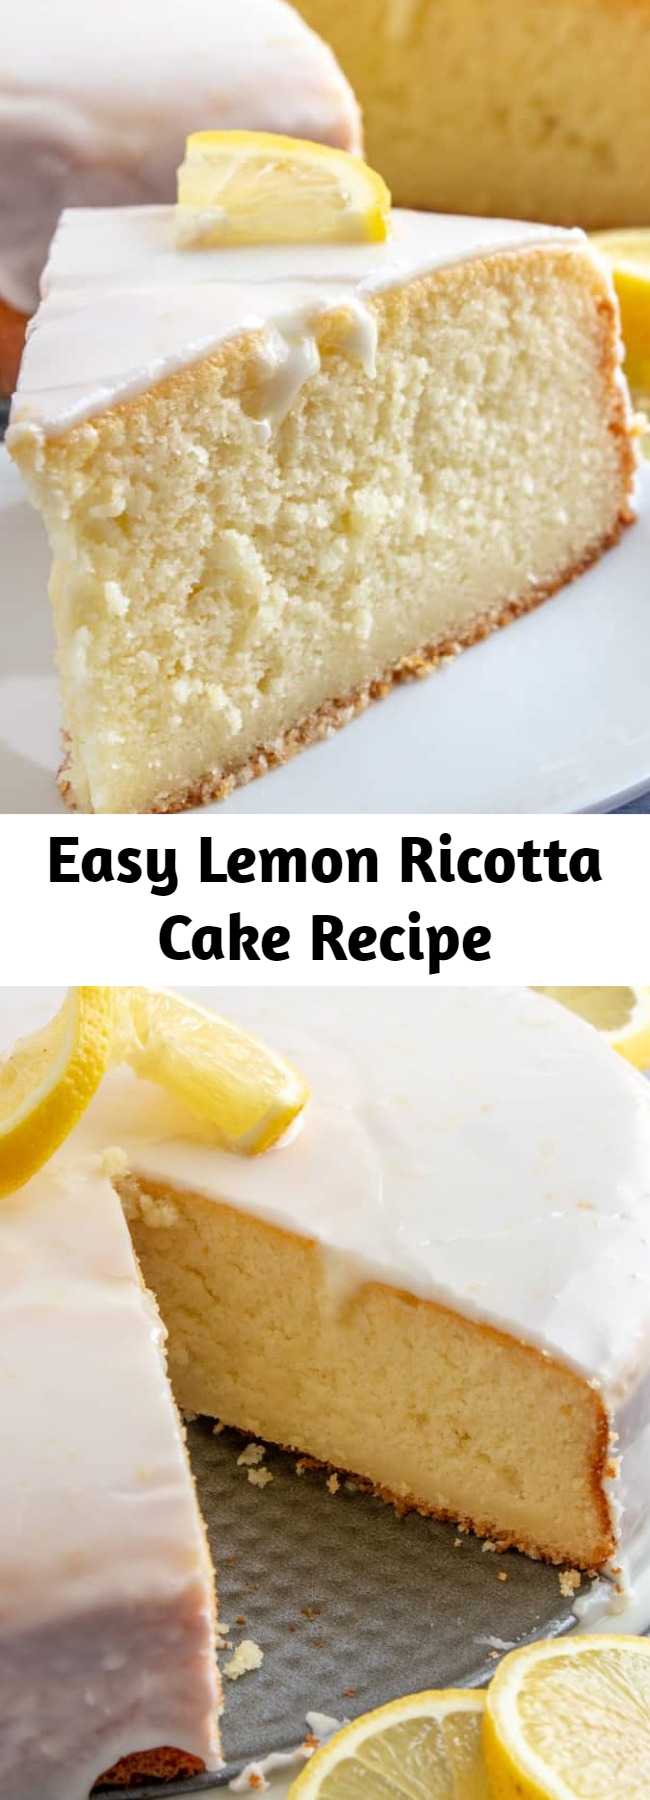 Easy Lemon Ricotta Cake Recipe - Moist, flavorful, simple and delicious, this Lemon Ricotta Cake is a tasty citrus cake recipe that you can whip up in one bowl and never have leftovers! #cake #lemon #baking #easyrecipe #tasty #baker #ricotta